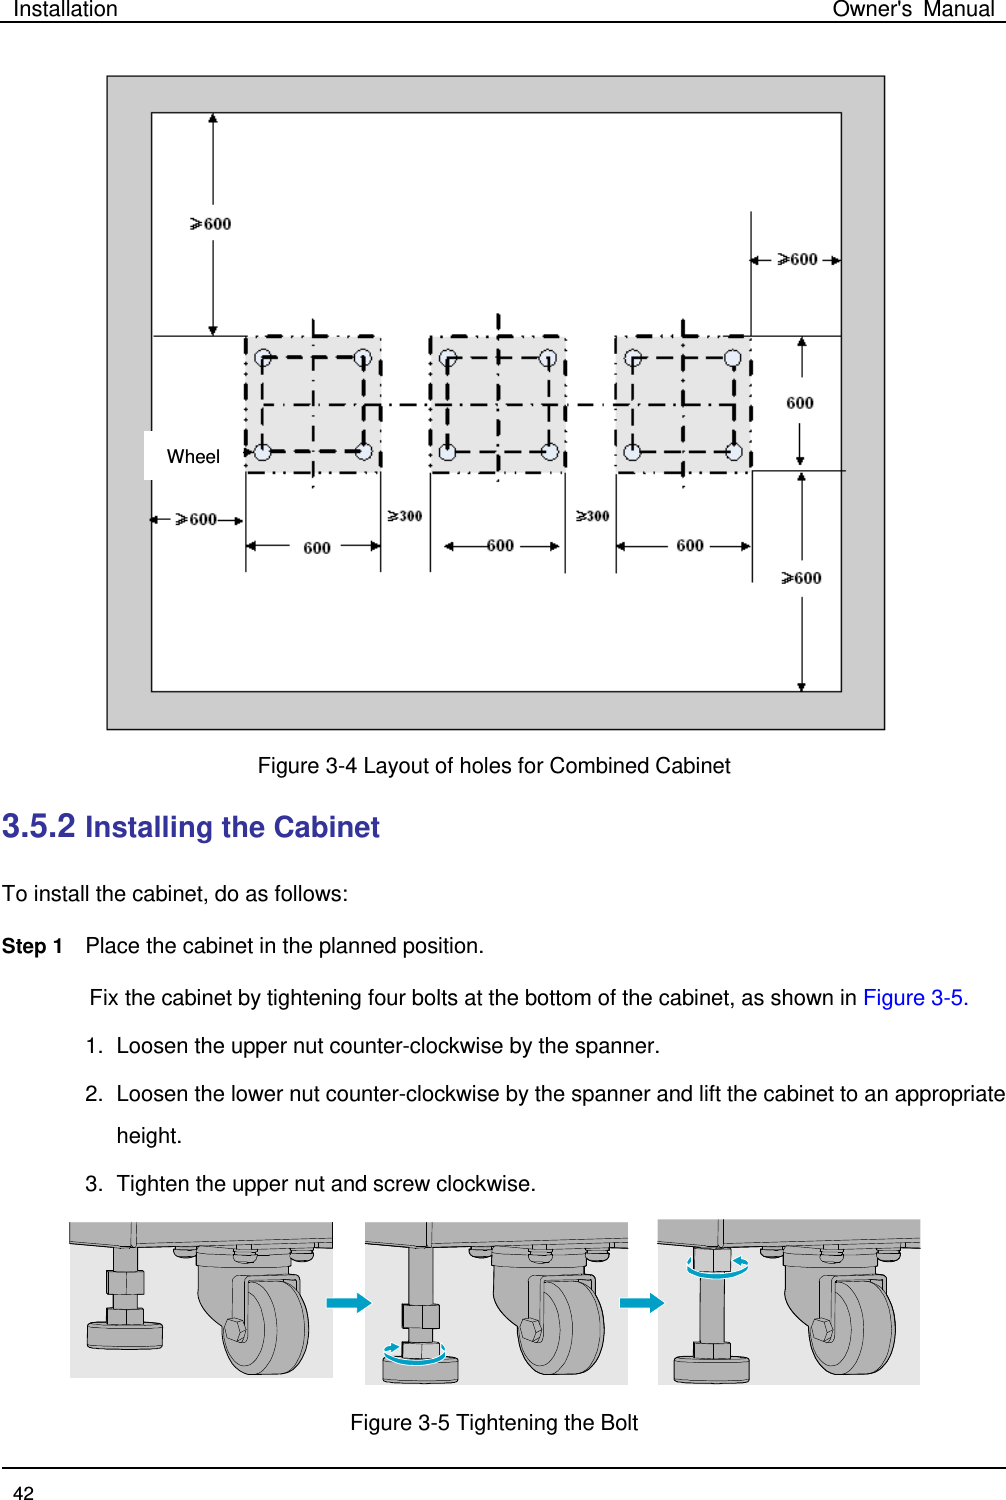 Installation Owner&apos;s Manual  42   Figure 3-4 Layout of holes for Combined Cabinet   3.5.2 Installing the Cabinet   To install the cabinet, do as follows:   Step 1 Place the cabinet in the planned position. Fix the cabinet by tightening four bolts at the bottom of the cabinet, as shown in Figure 3-5.   1. Loosen the upper nut counter-clockwise by the spanner.   2. Loosen the lower nut counter-clockwise by the spanner and lift the cabinet to an appropriate height.   3. Tighten the upper nut and screw clockwise.      Figure 3-5 Tightening the Bolt   Wheel 